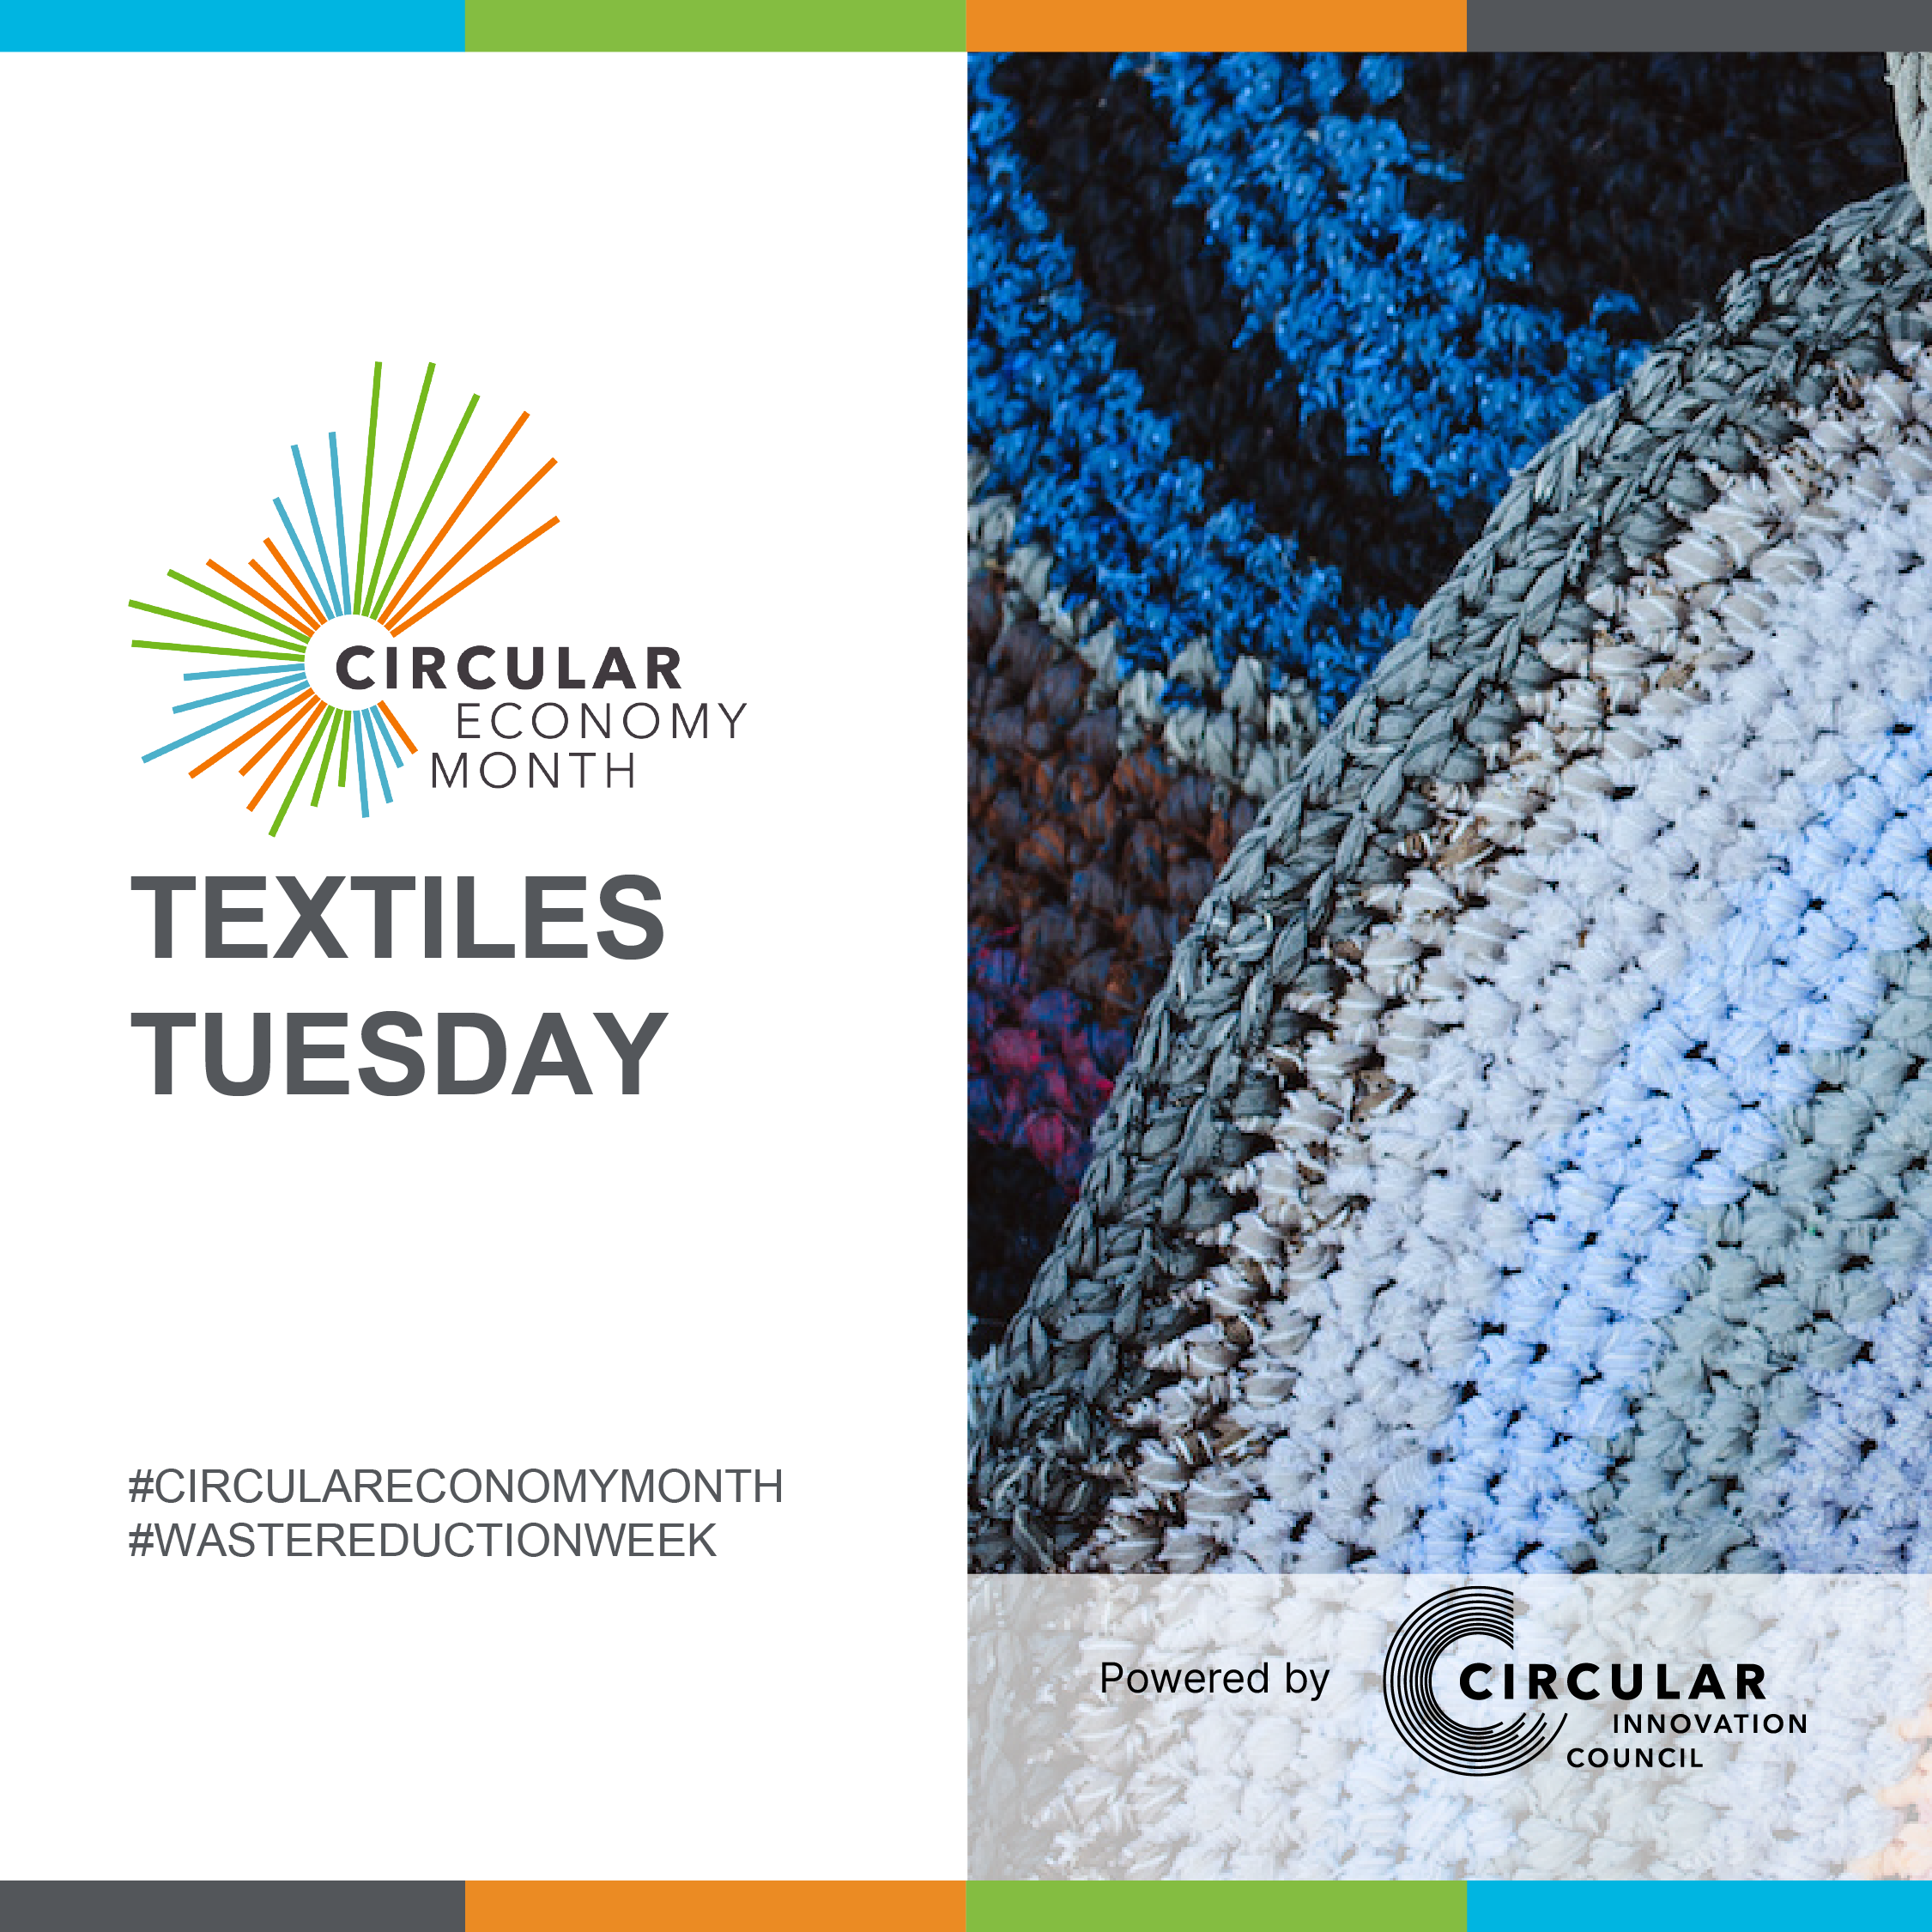 Alt Text: Beautiful, multicoloured, upcycled rugs woven from waste material. Textiles Tuesday. #CircularEconomyMonth #WasteReductionWeek. Circular Economy Month, powered by Circular Innovation Council